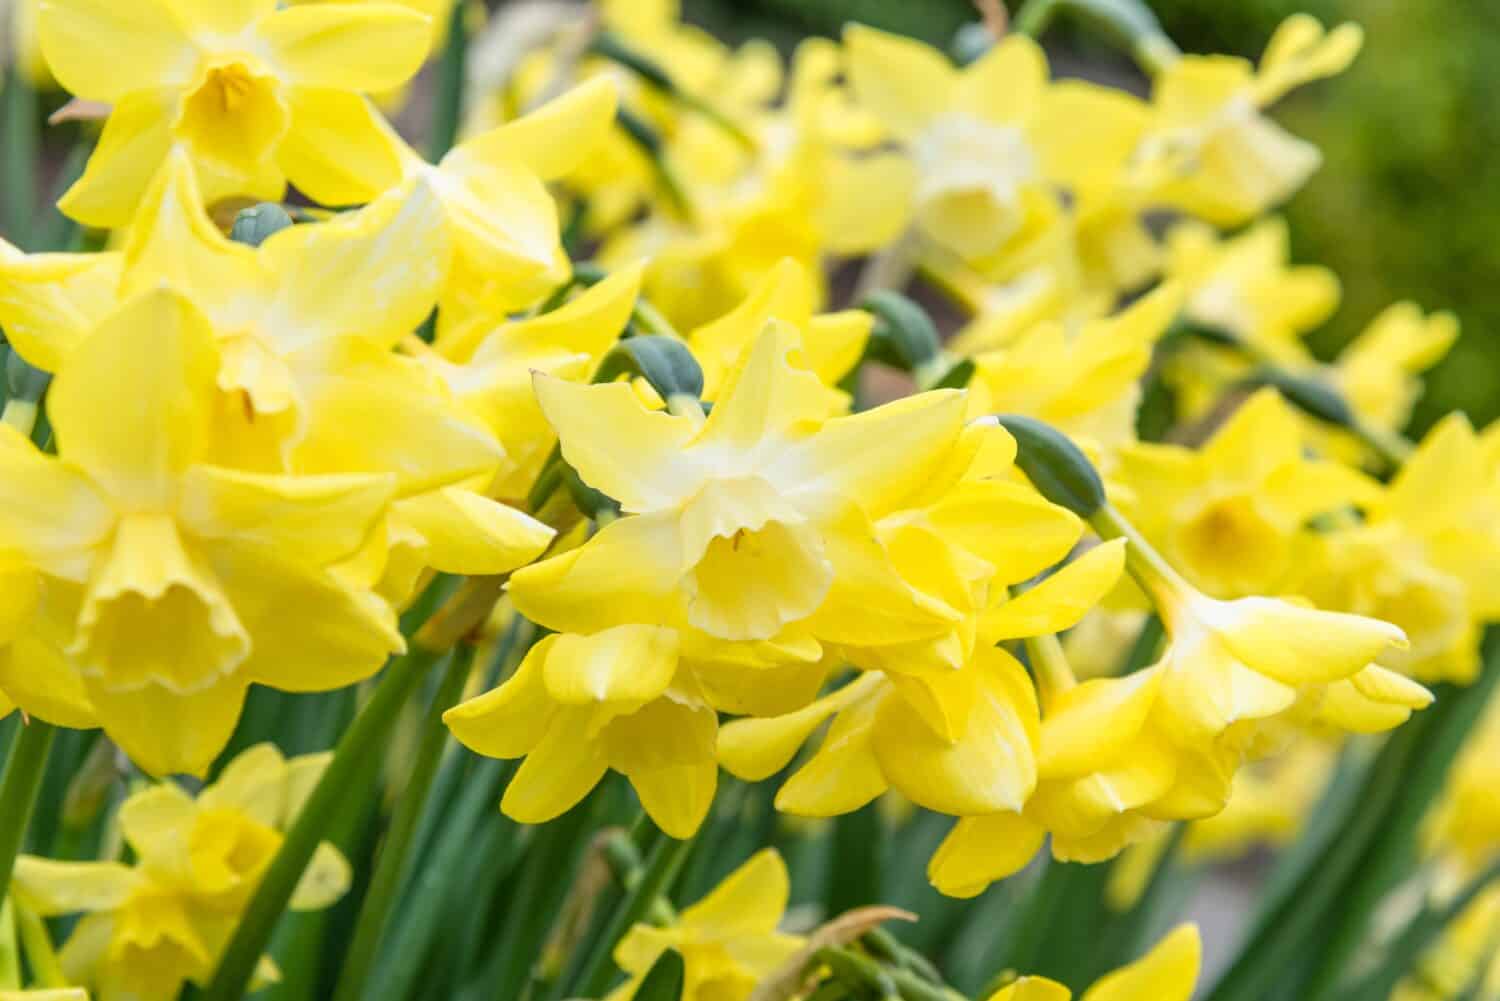 Yellow daffodils in flower, Narcissus Pipit